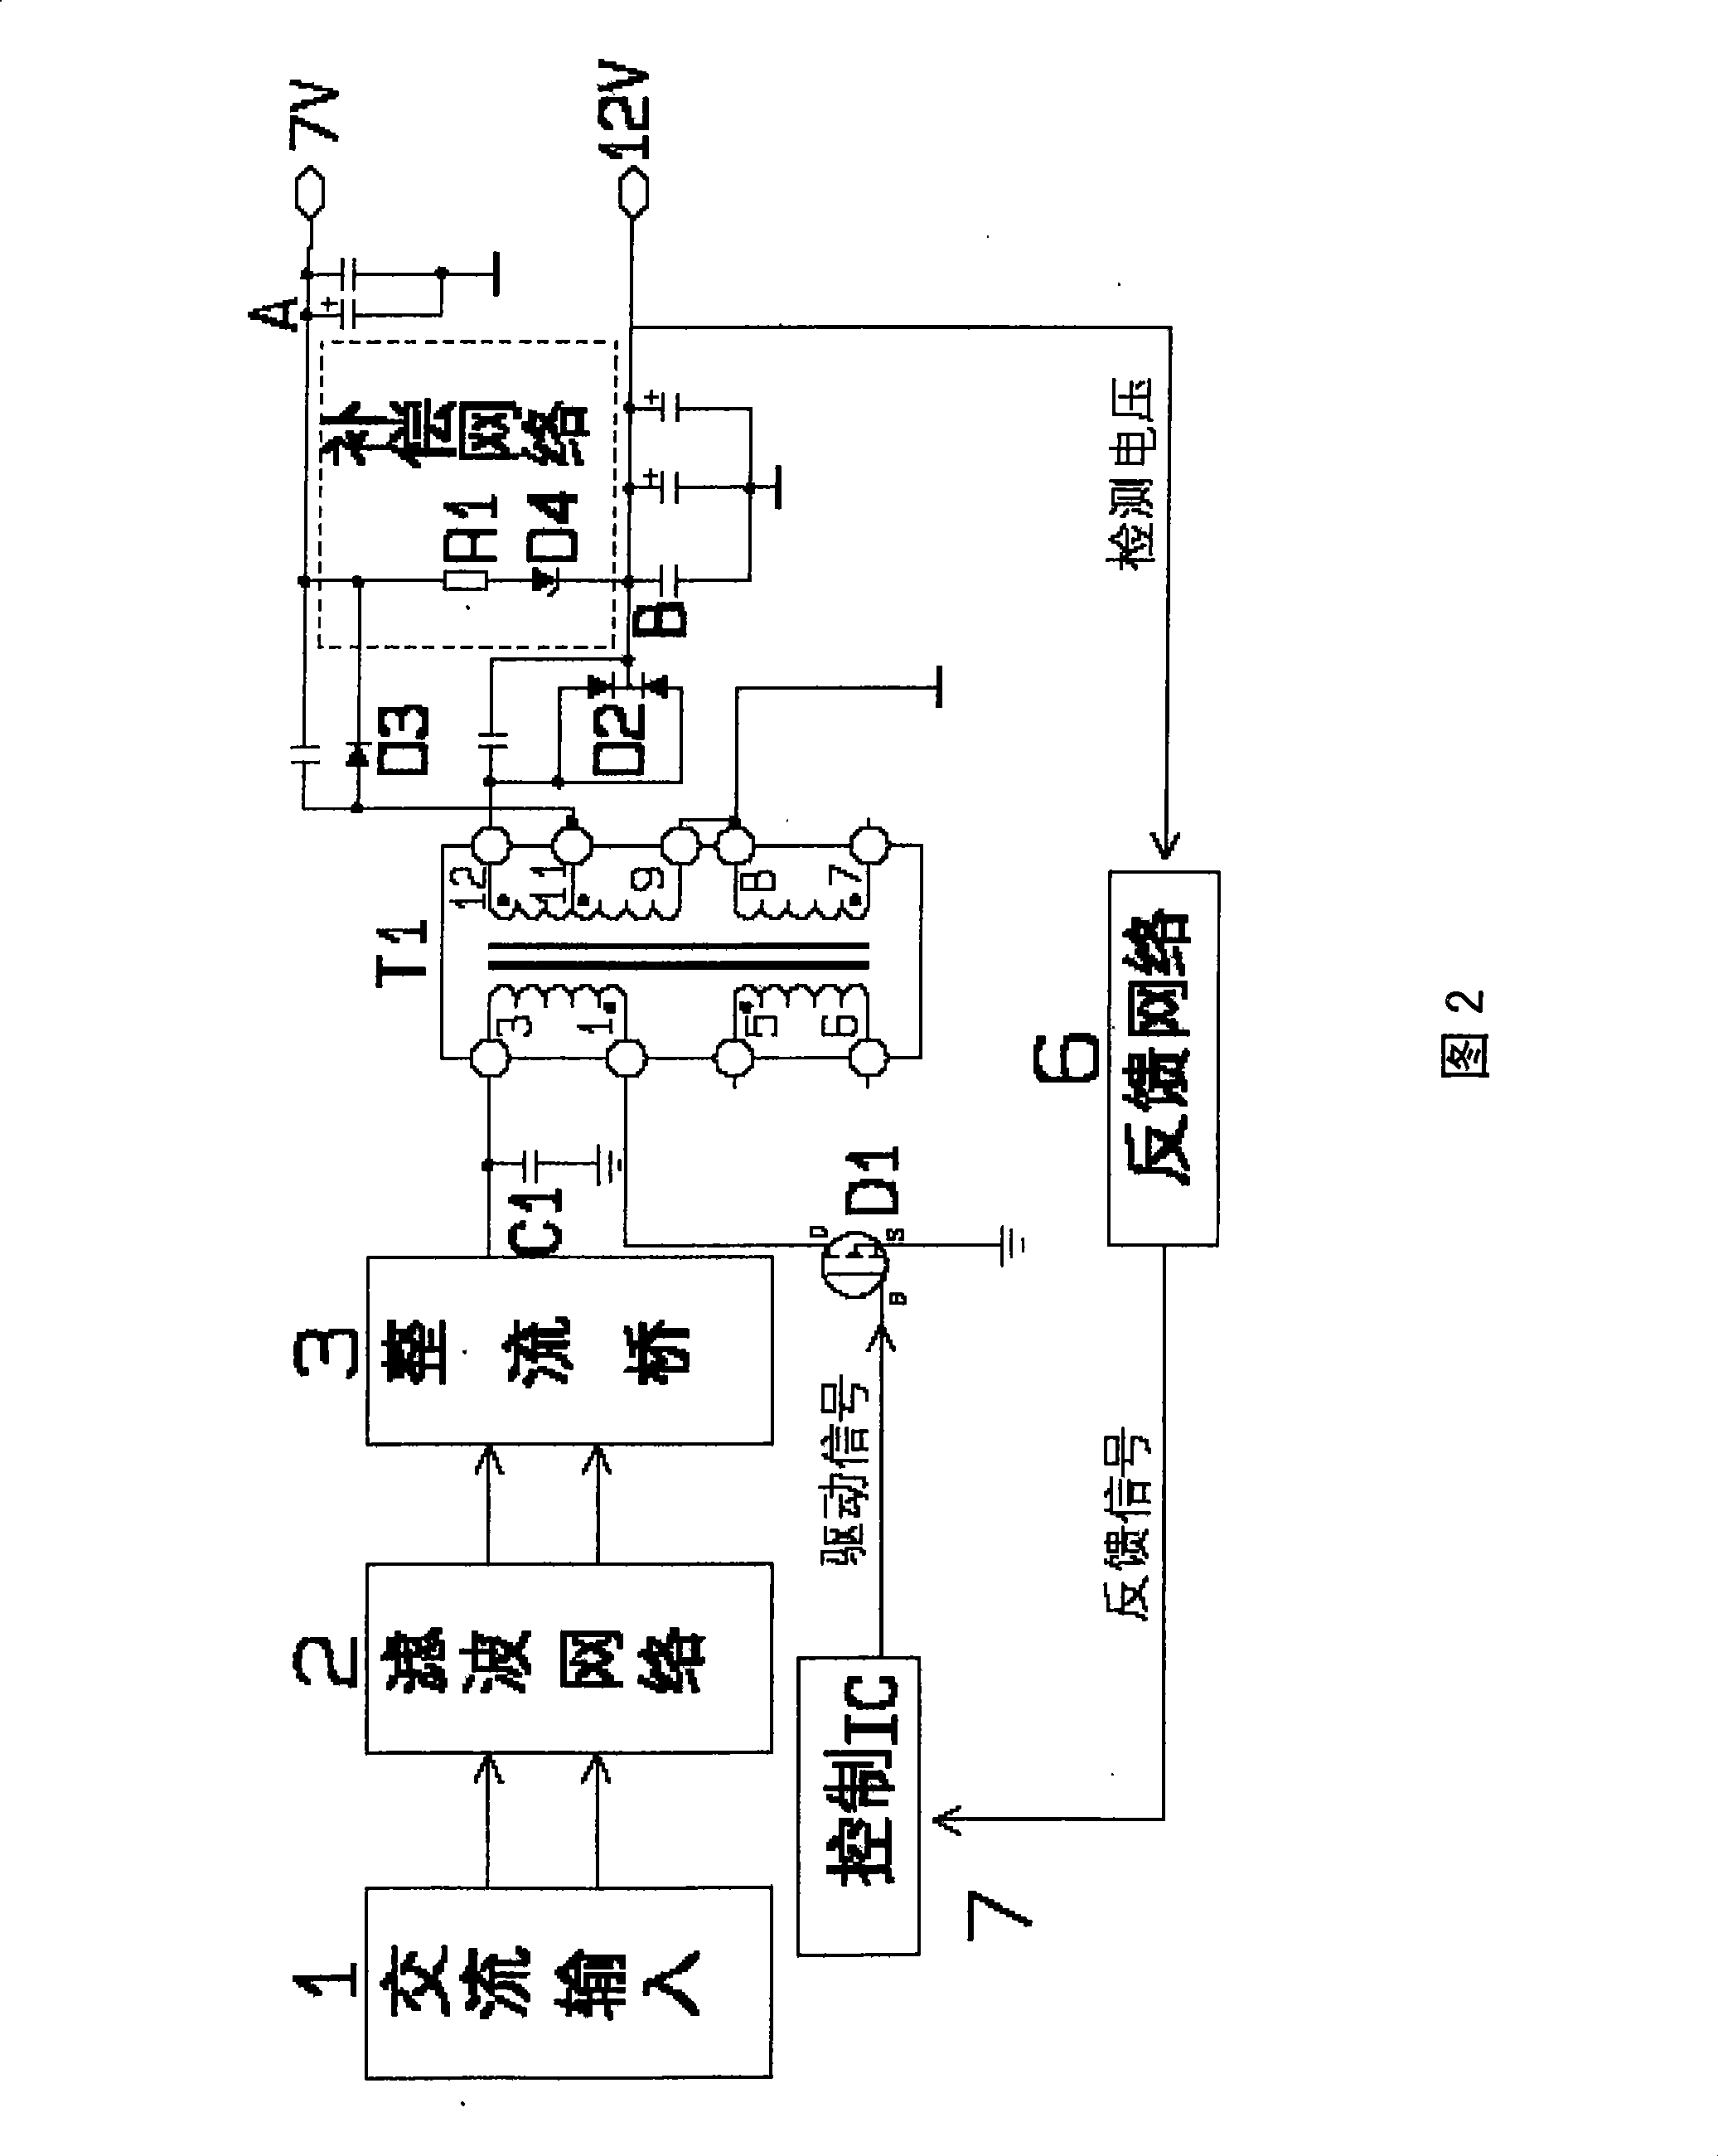 Single chip controlled power supply apparatus